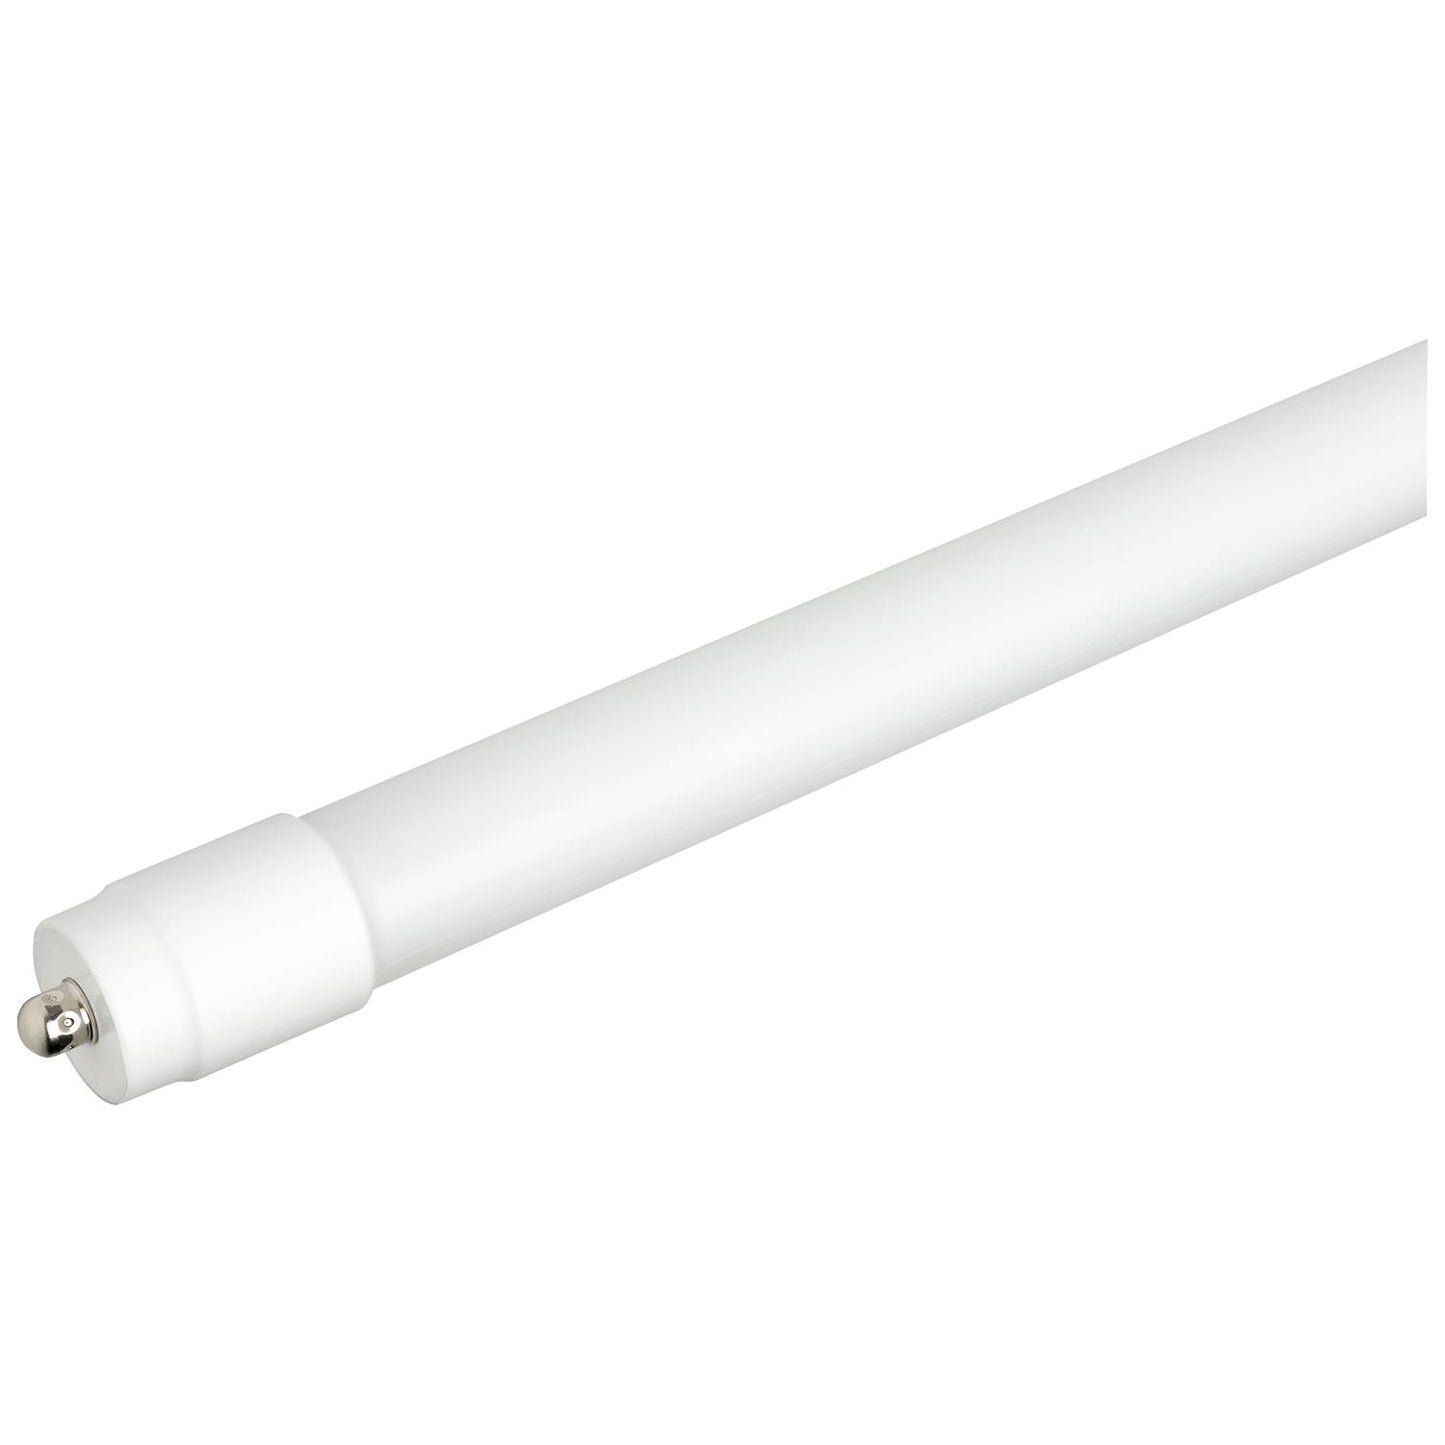 Sunlite T8/LED/ADV/8'/43W/40K LED T8 43W 8 Foot Bypass Dual End Single Pin Base, 4000K Cool White with PET Coating